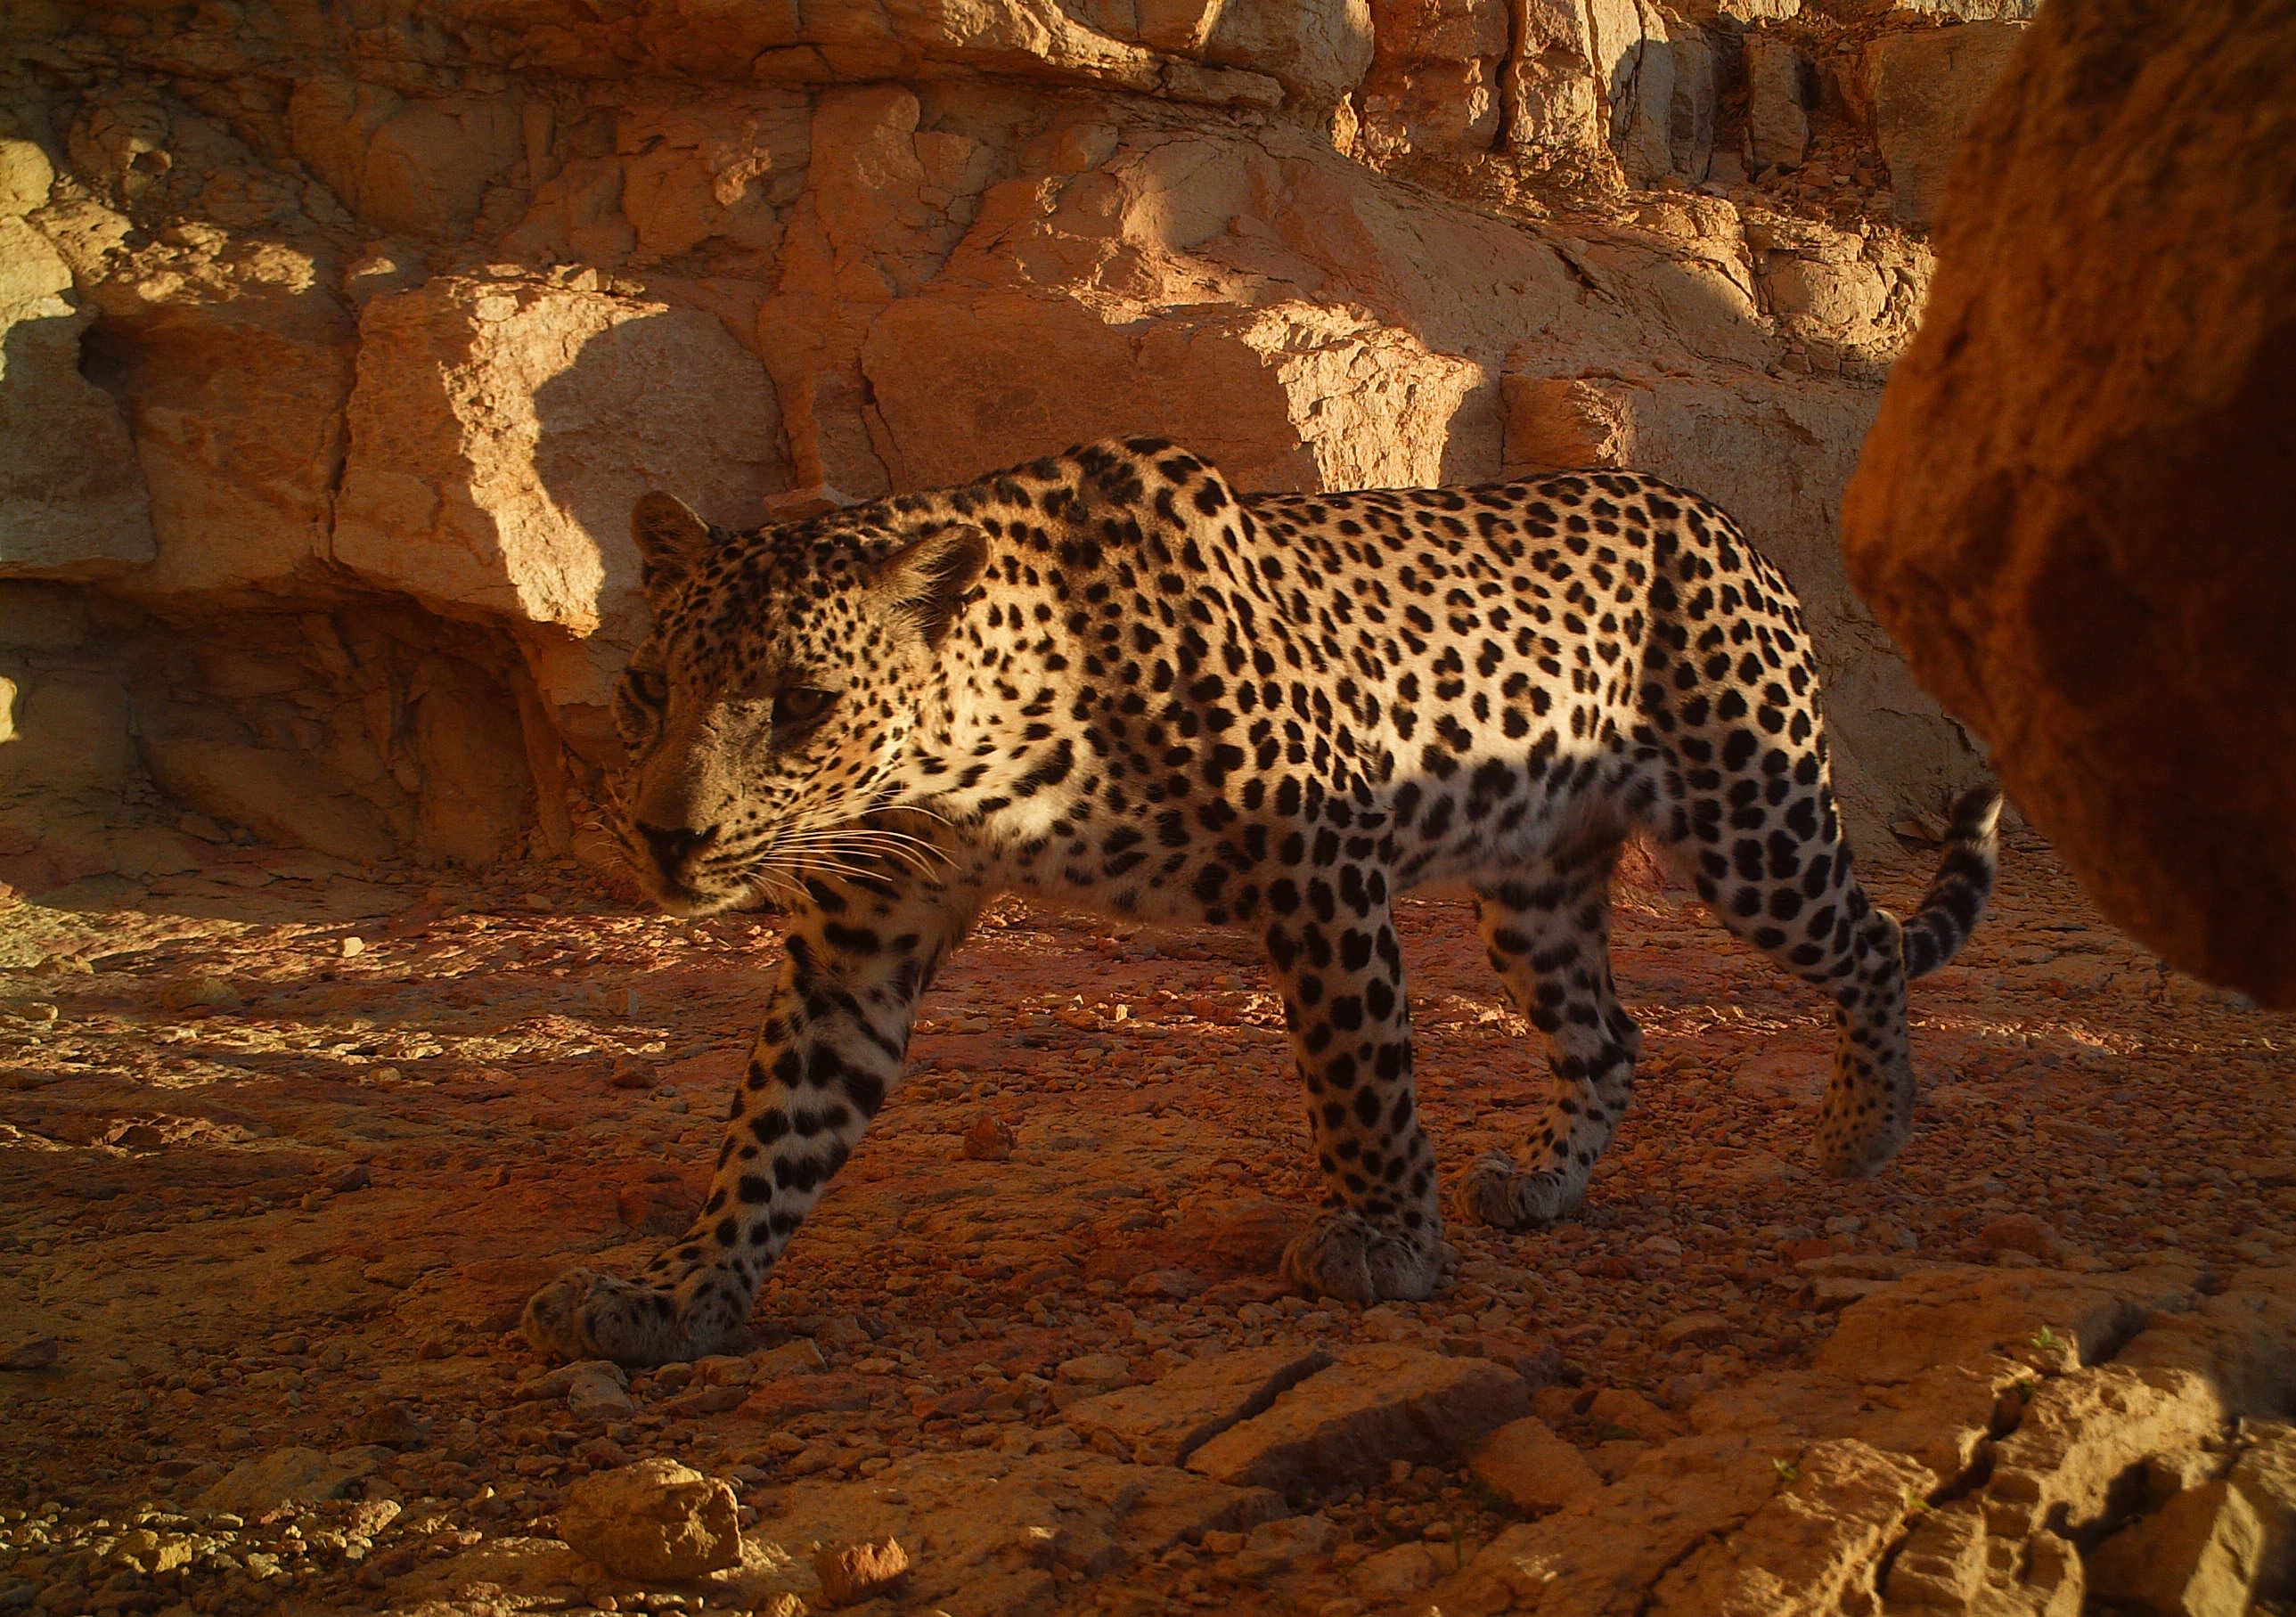 The world's smallest leopard is clinging to life in the mountains